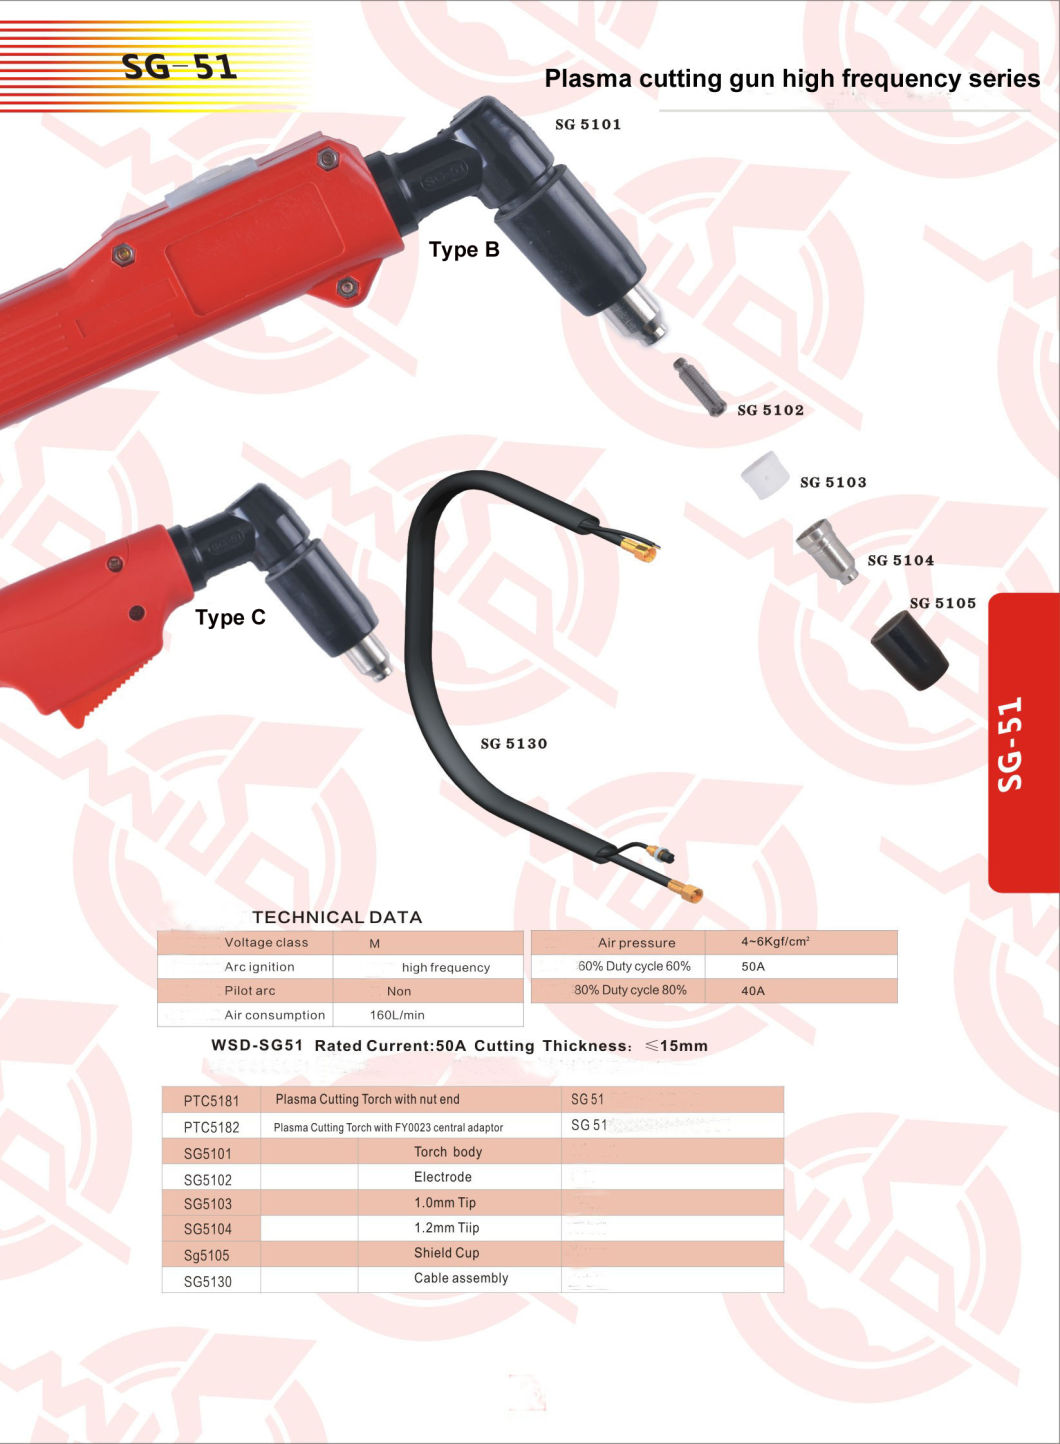 JTM-W01-SG51-B SG51 Plasma high frequency cutting Torch with TypeB handle and switch